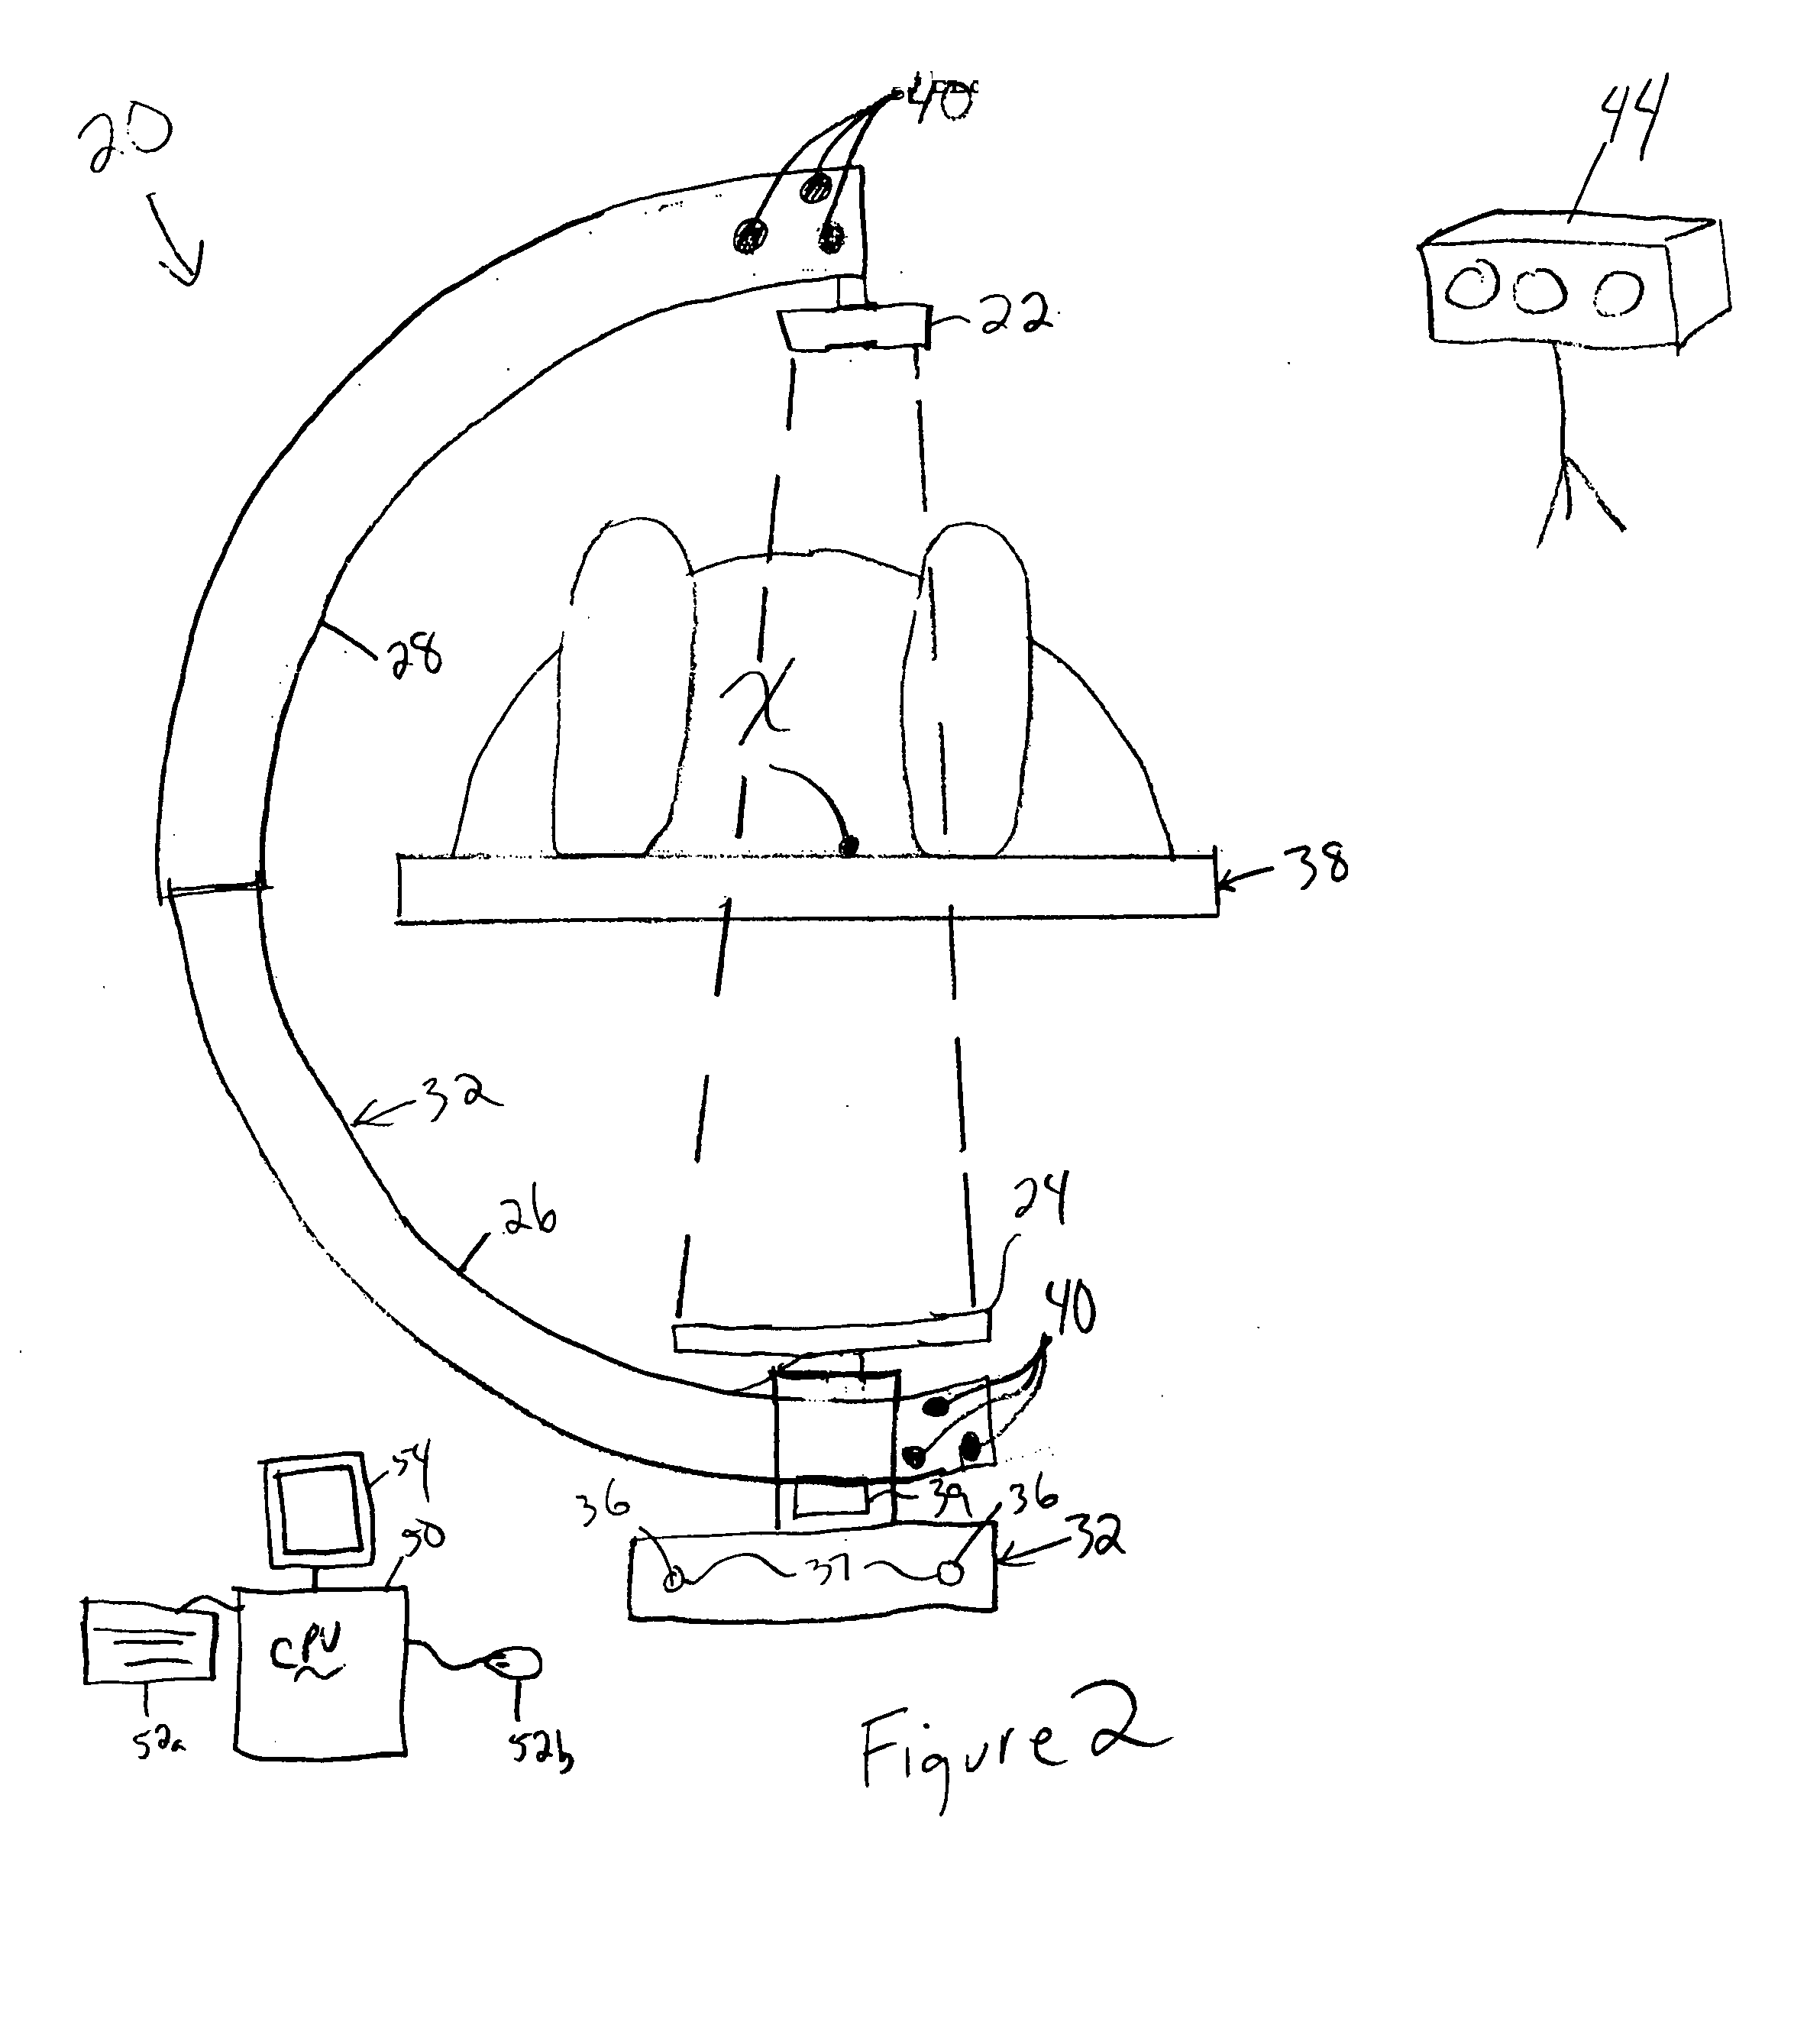 Intraoperative imaging system